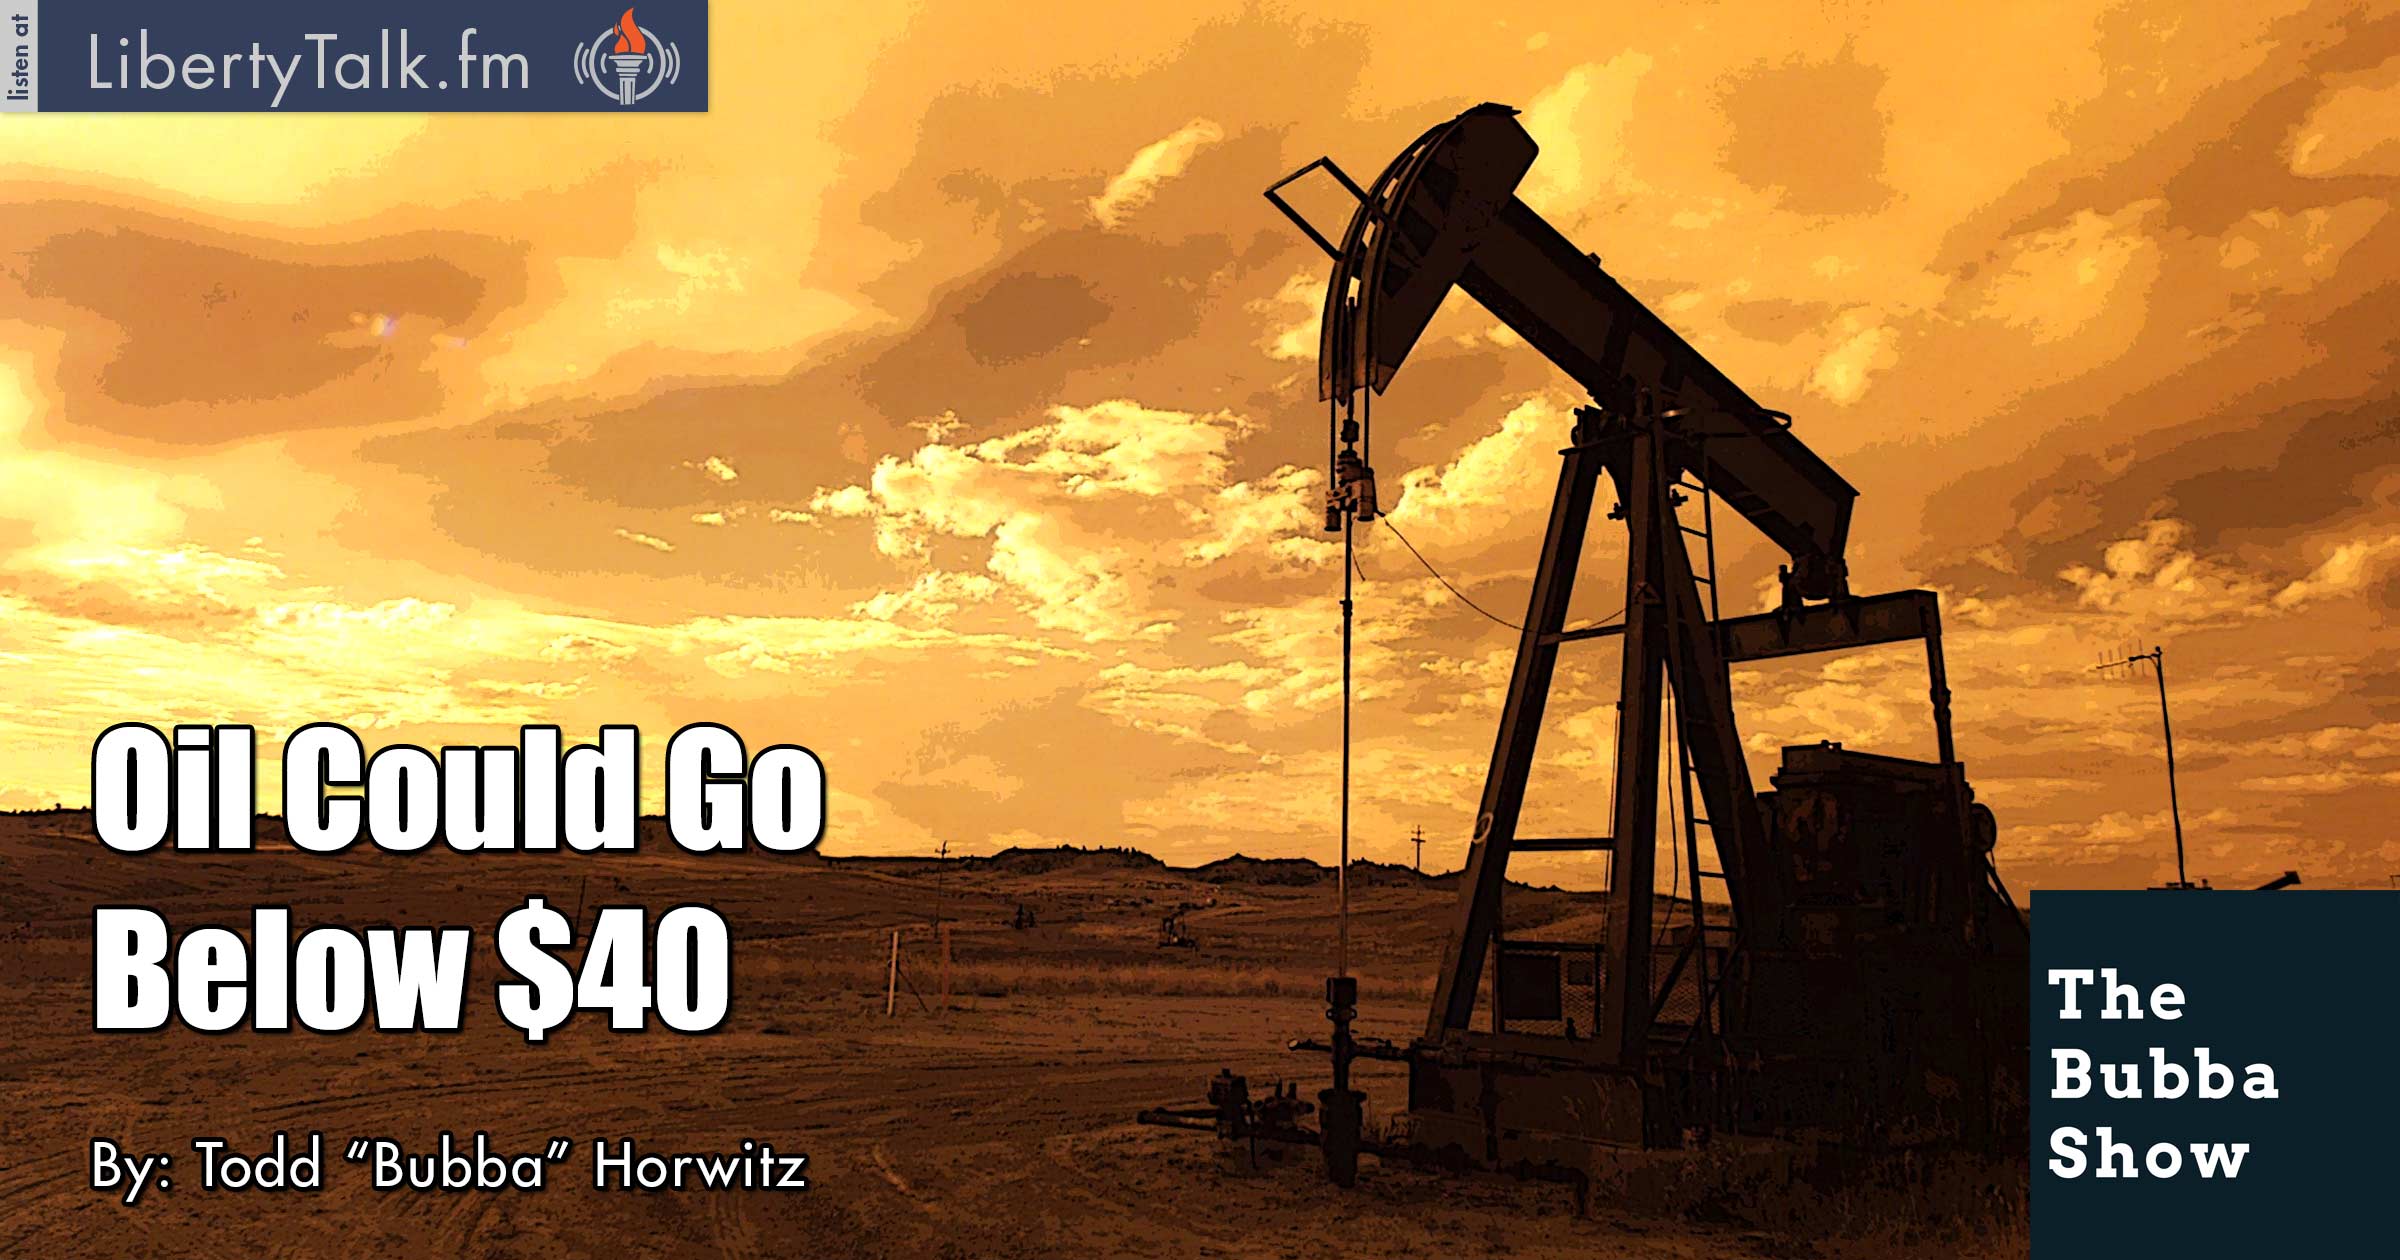 Oil Could Go Below $40 - The Bubba Show